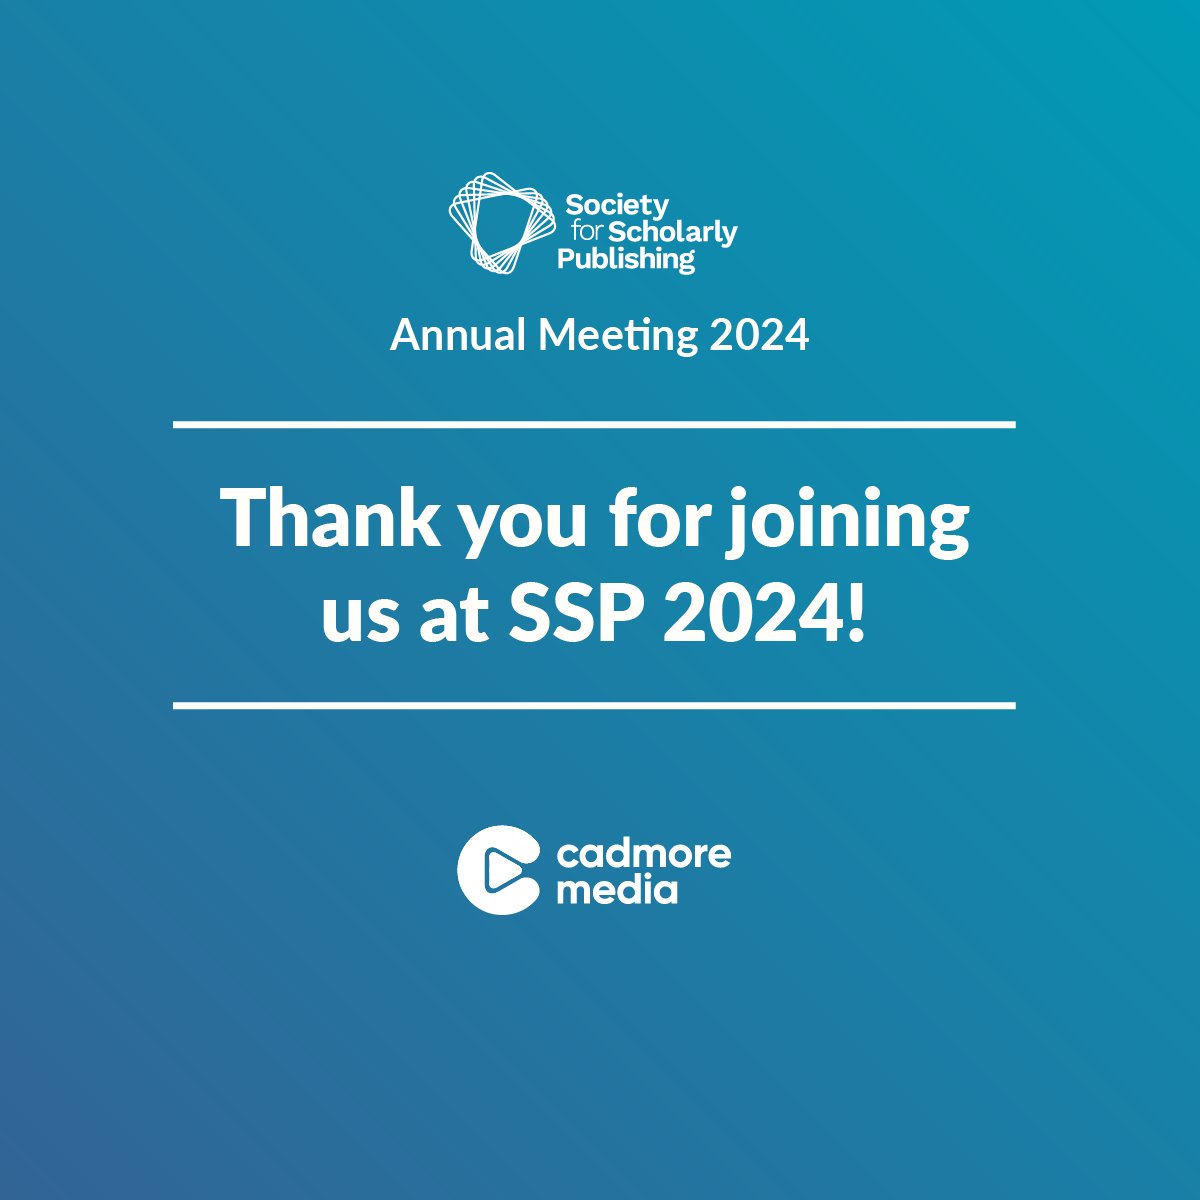 A huge thank you to everyone who visited our booth and attended our industry breakout session at #SSP2024! We had a fantastic time and truly appreciate your engagement. We’re excited to follow up with everyone and look forward to seeing you next year!

@ScholarlyPub